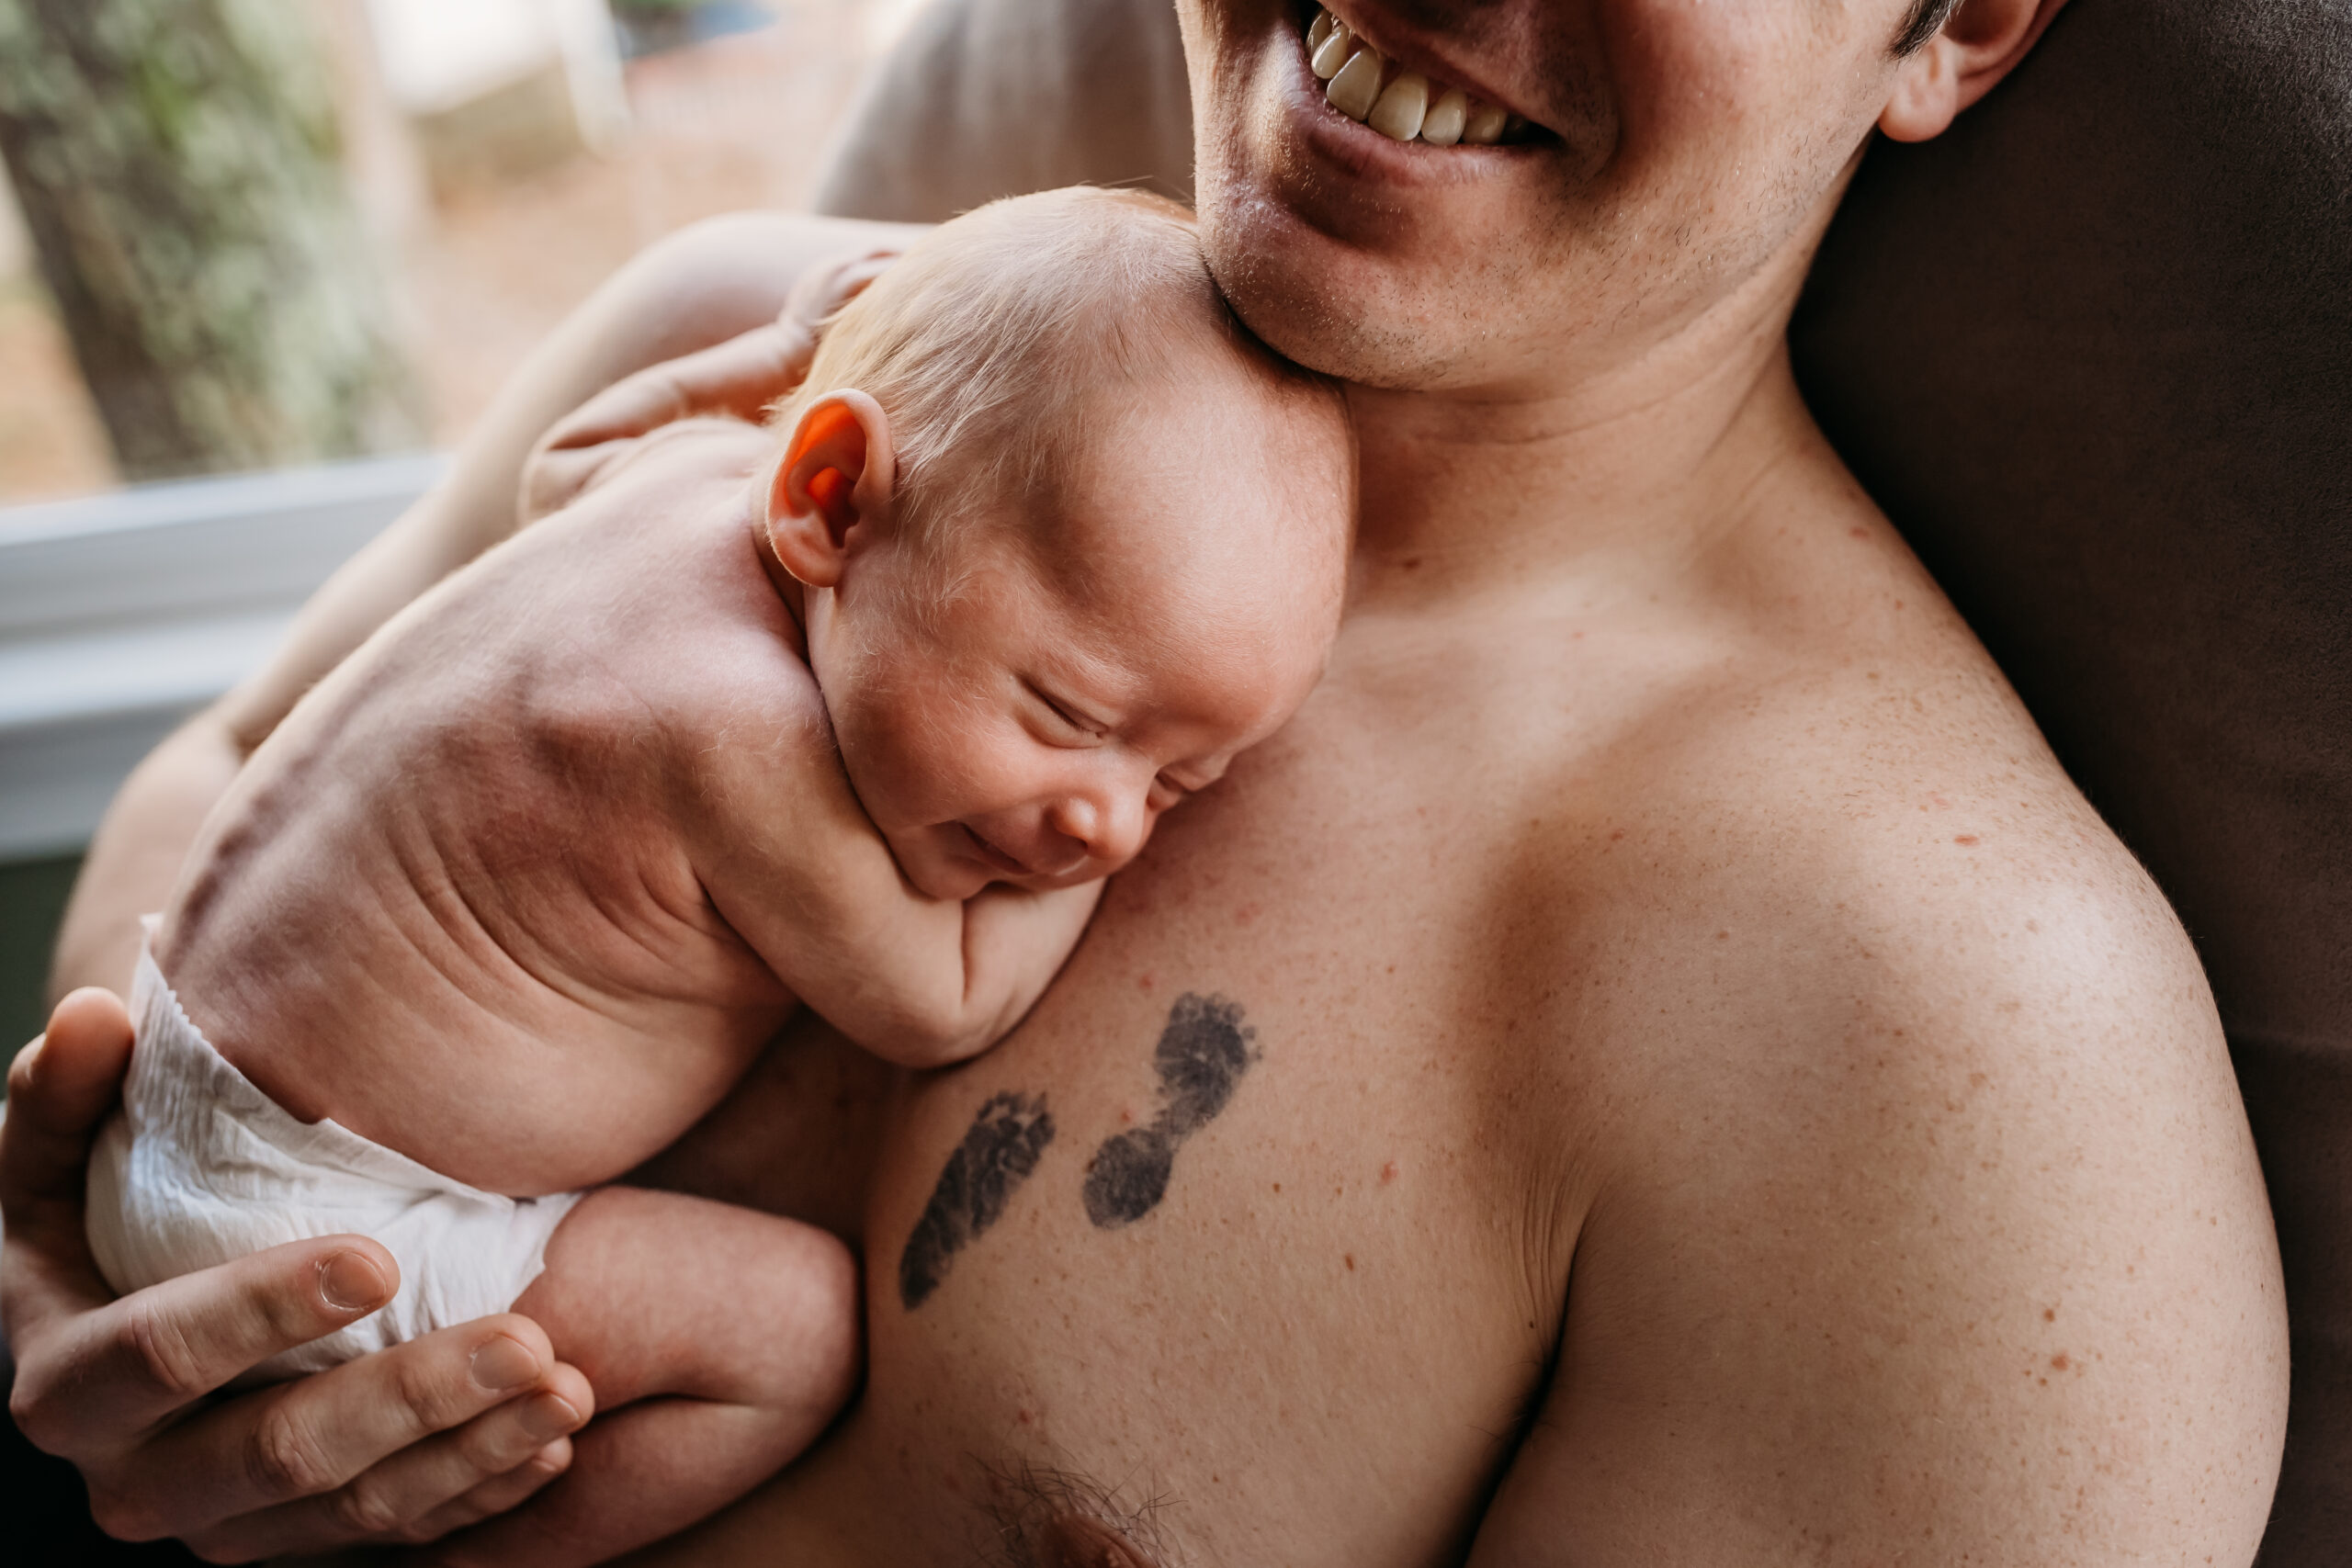 shirtless dad with tattoo holding mostly nude baby